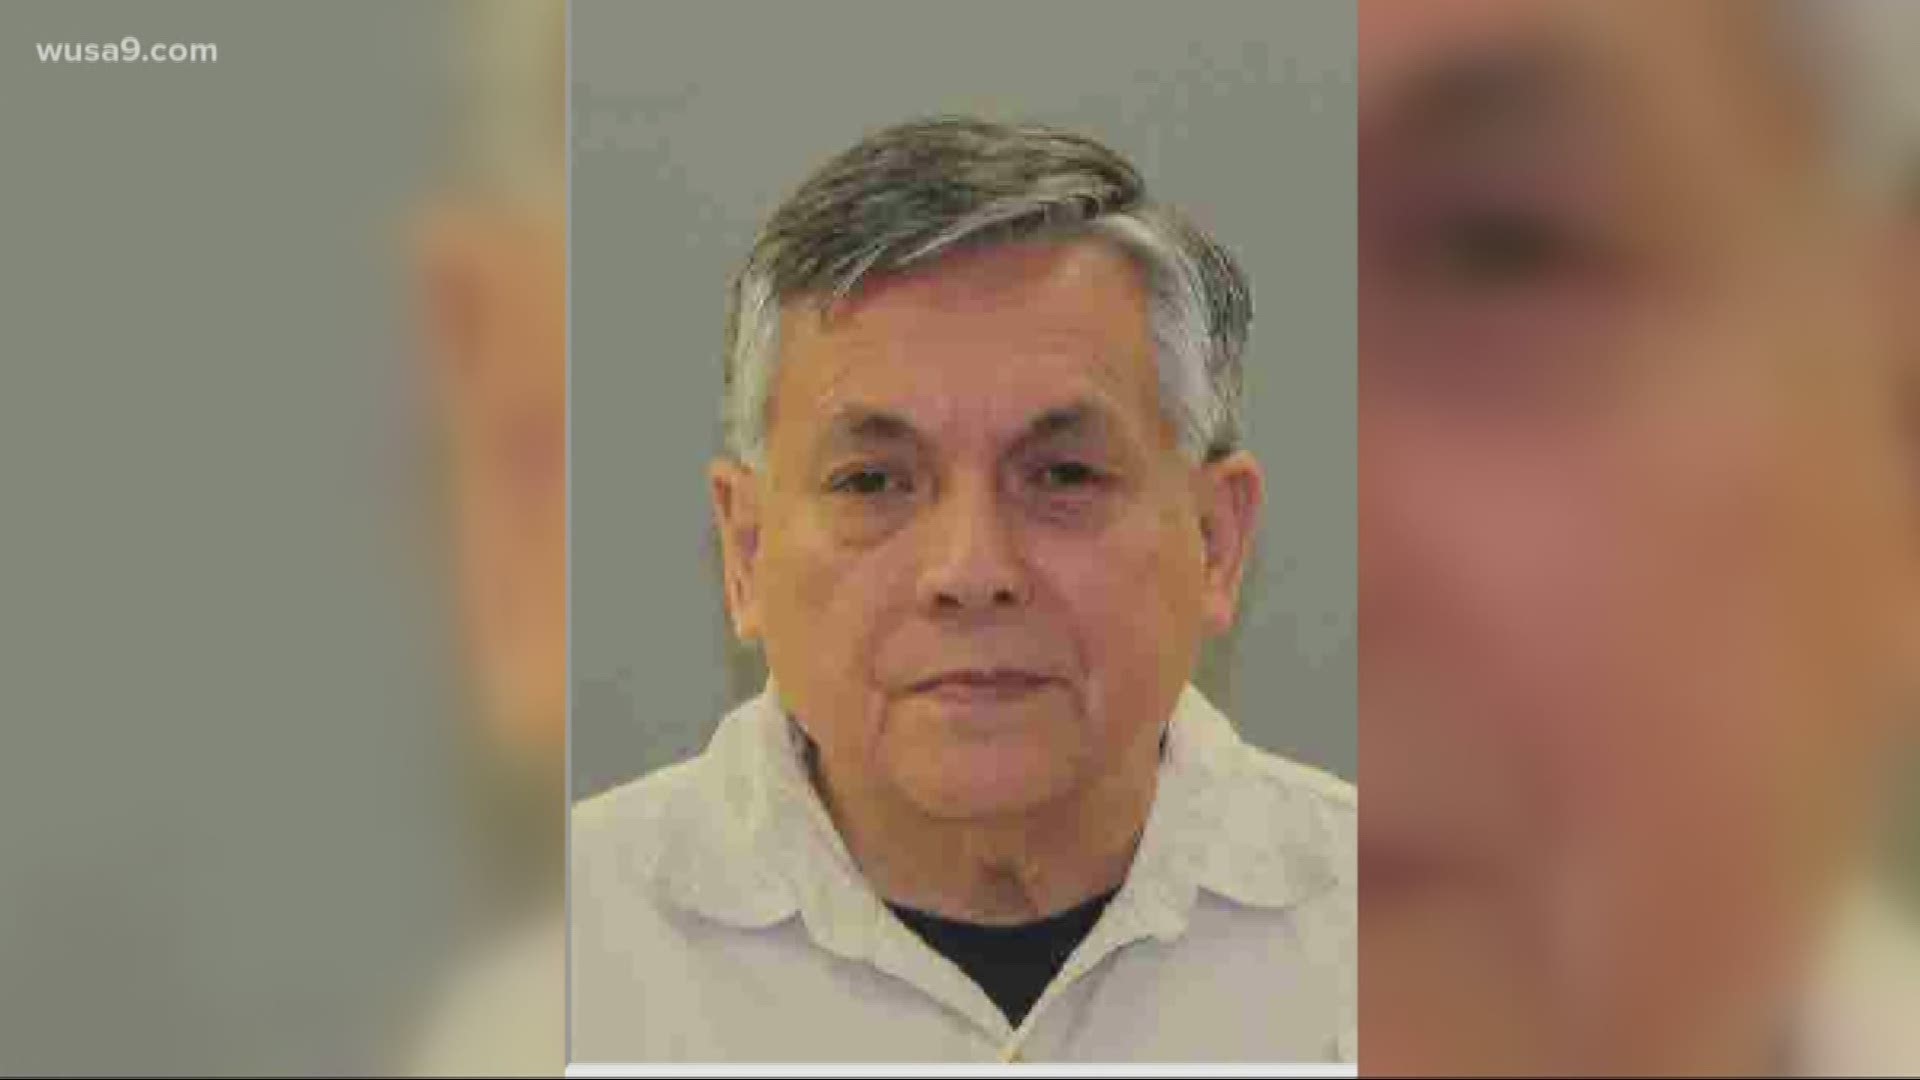 A Maryland pediatrician accused of sexually assaulting a patient is back in police custody tonight. 68-year-old Doctor Ernesto Torres was arrested today after Frederick County prosecutors say more victims came forward.